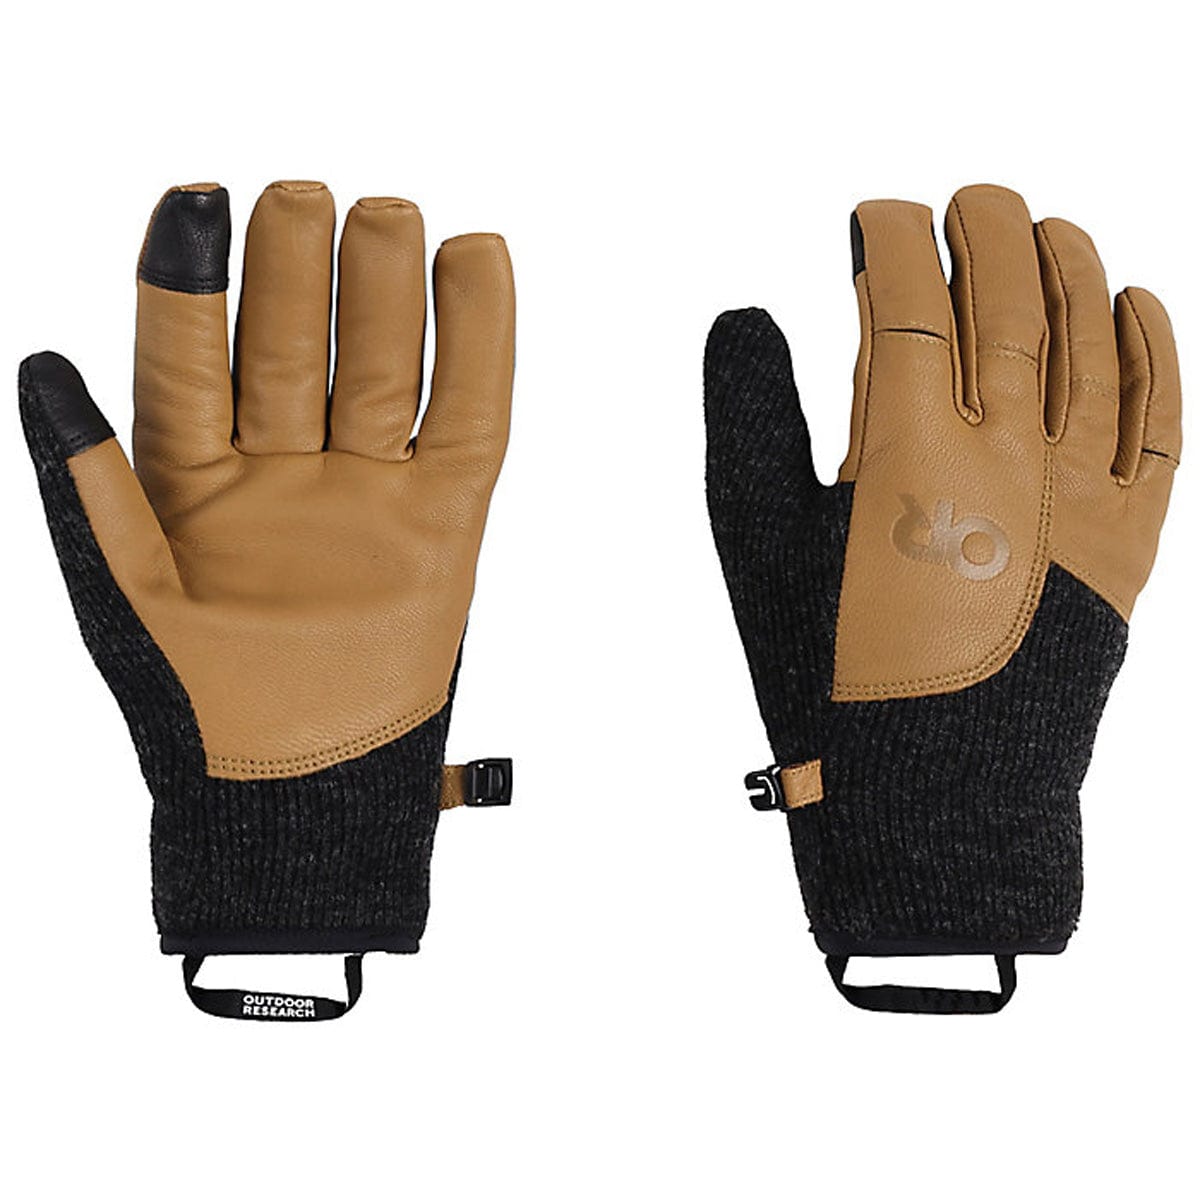 Outdoor Research Women's Flurry Driving Gloves – Campmor